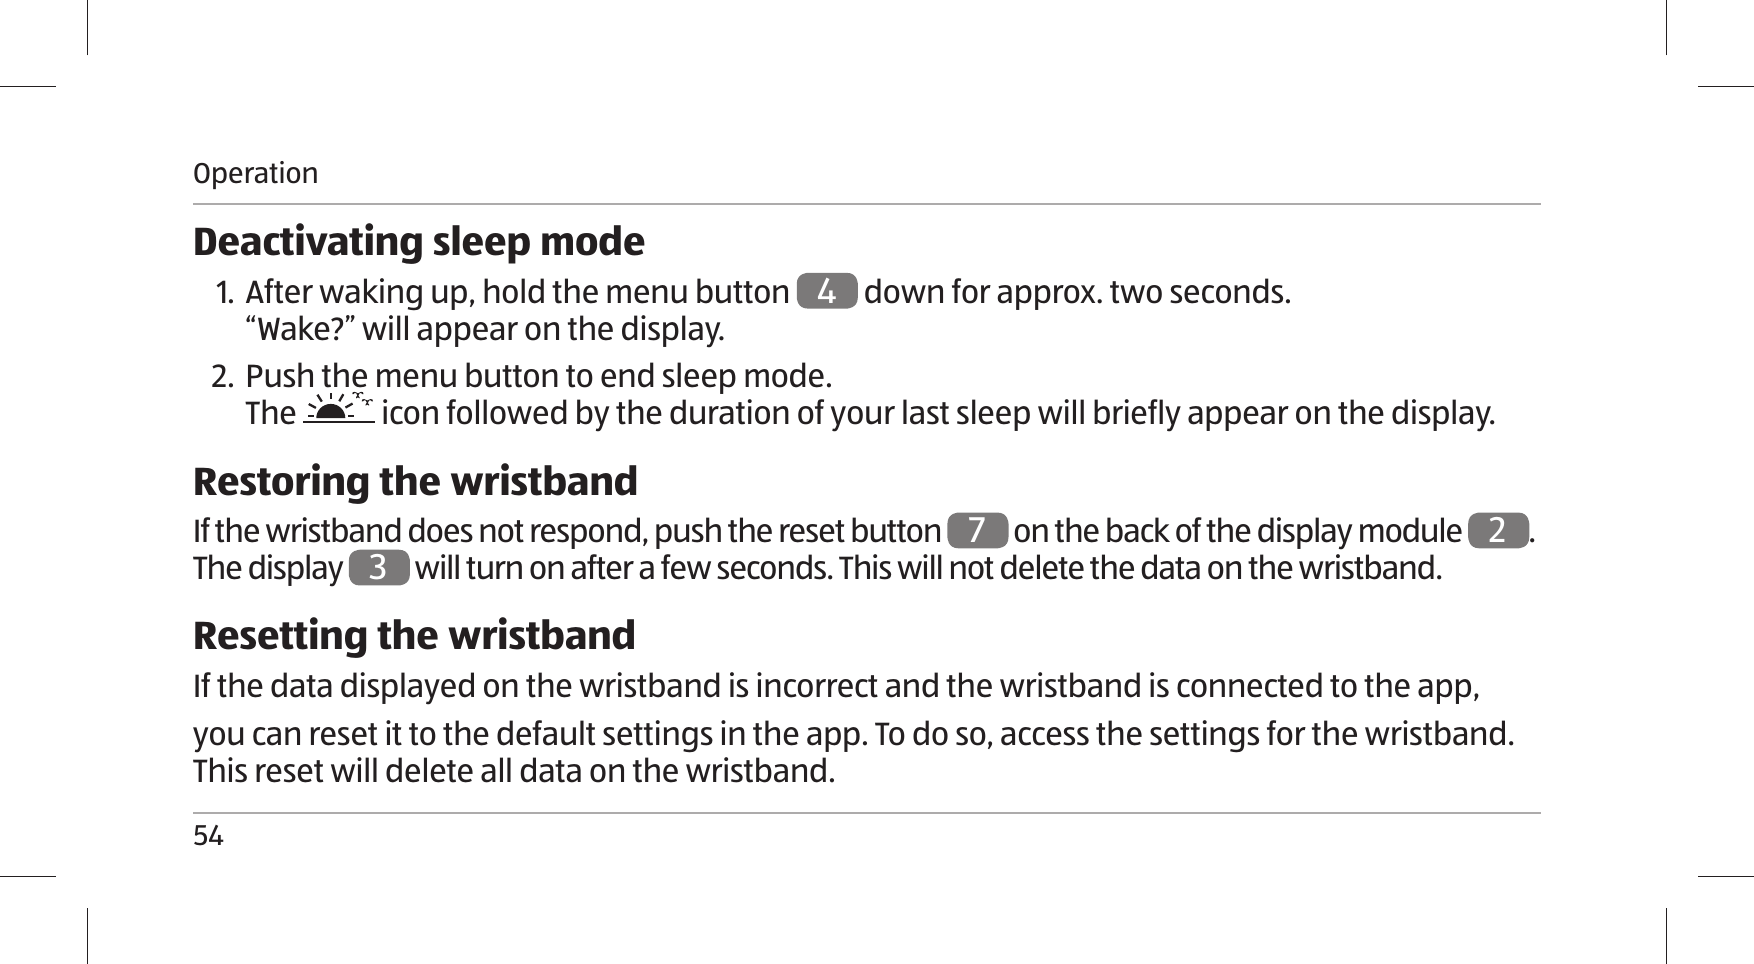 Operation54Deactivating sleep mode1. After waking up, hold the menu button 4 down for approx. two seconds. “Wake?” will appear on the display.2. Push the menu button to end sleep mode. The   icon followed by the duration of your last sleep will briefly appear on the display.Restoring the wristbandIf the wristband does not respond, push the reset button 7 on the back of the display module 2. The display 3 will turn on after a few seconds. This will not delete the data on the wristband. Resetting the wristbandIf the data displayed on the wristband is incorrect and the wristband is connected to the app, you can reset it to the default settings in the app. To do so, access the settings for the wristband. This reset will delete all data on the wristband.